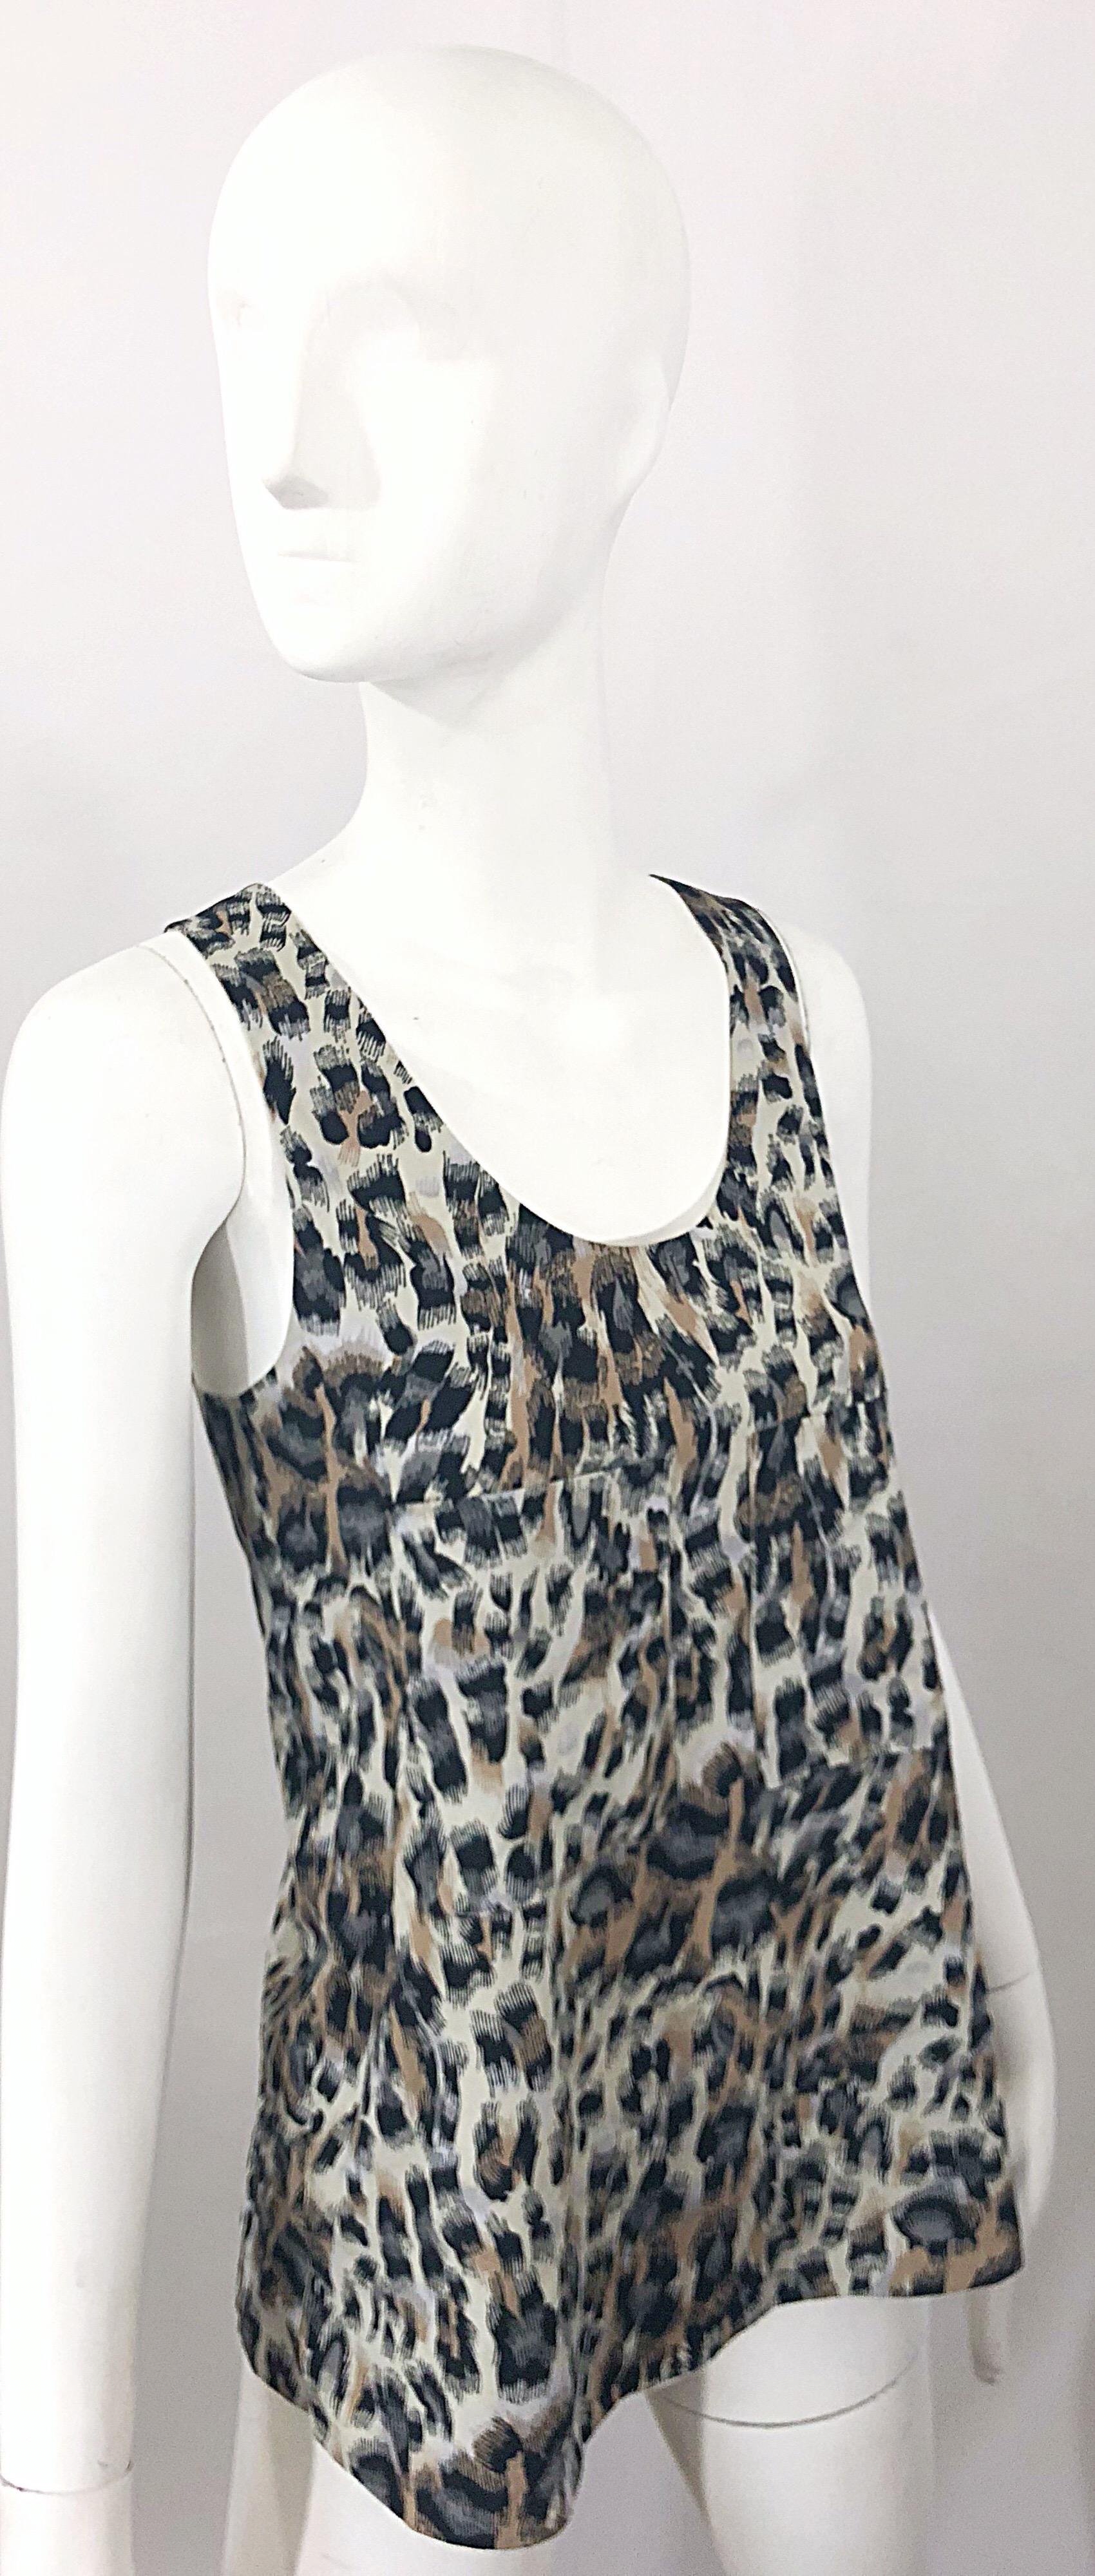 1990s Chloe Leopard Cheetah Print Taupe + Gray + Brown 90s Sleeveless Tunic Top In Excellent Condition For Sale In San Diego, CA